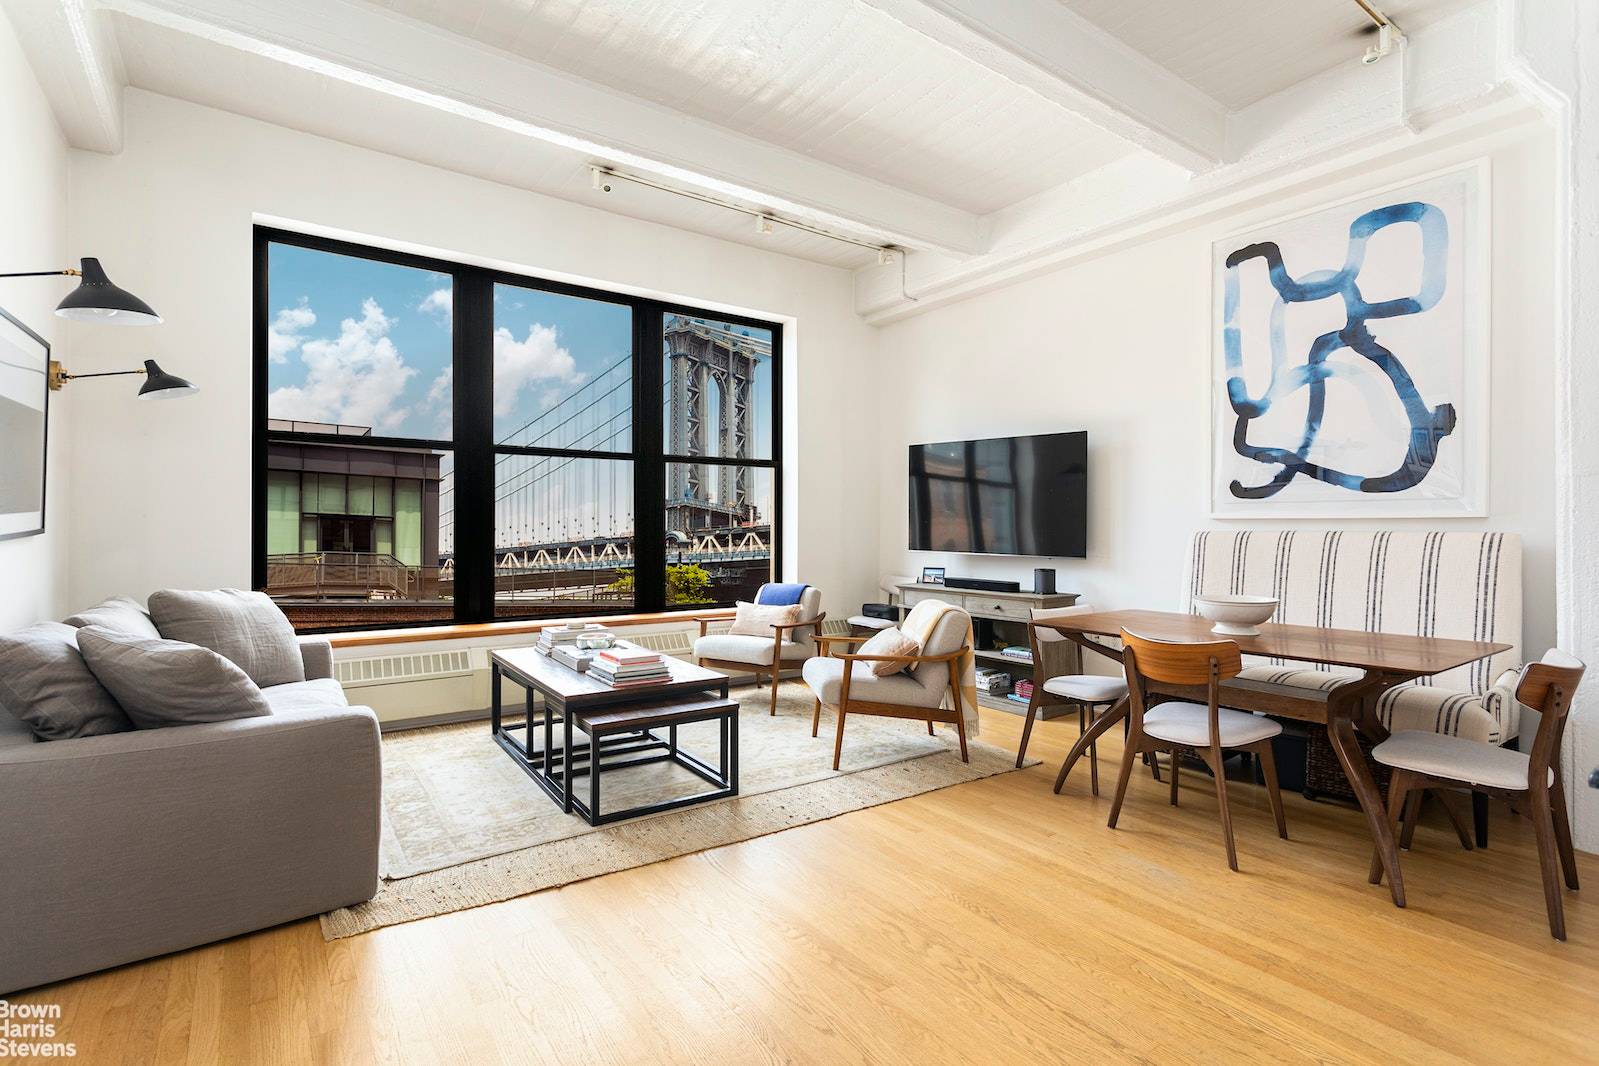 Loft living in the heart of vibrant DUMBO with a spectacular view of the Manhattan Bridge.